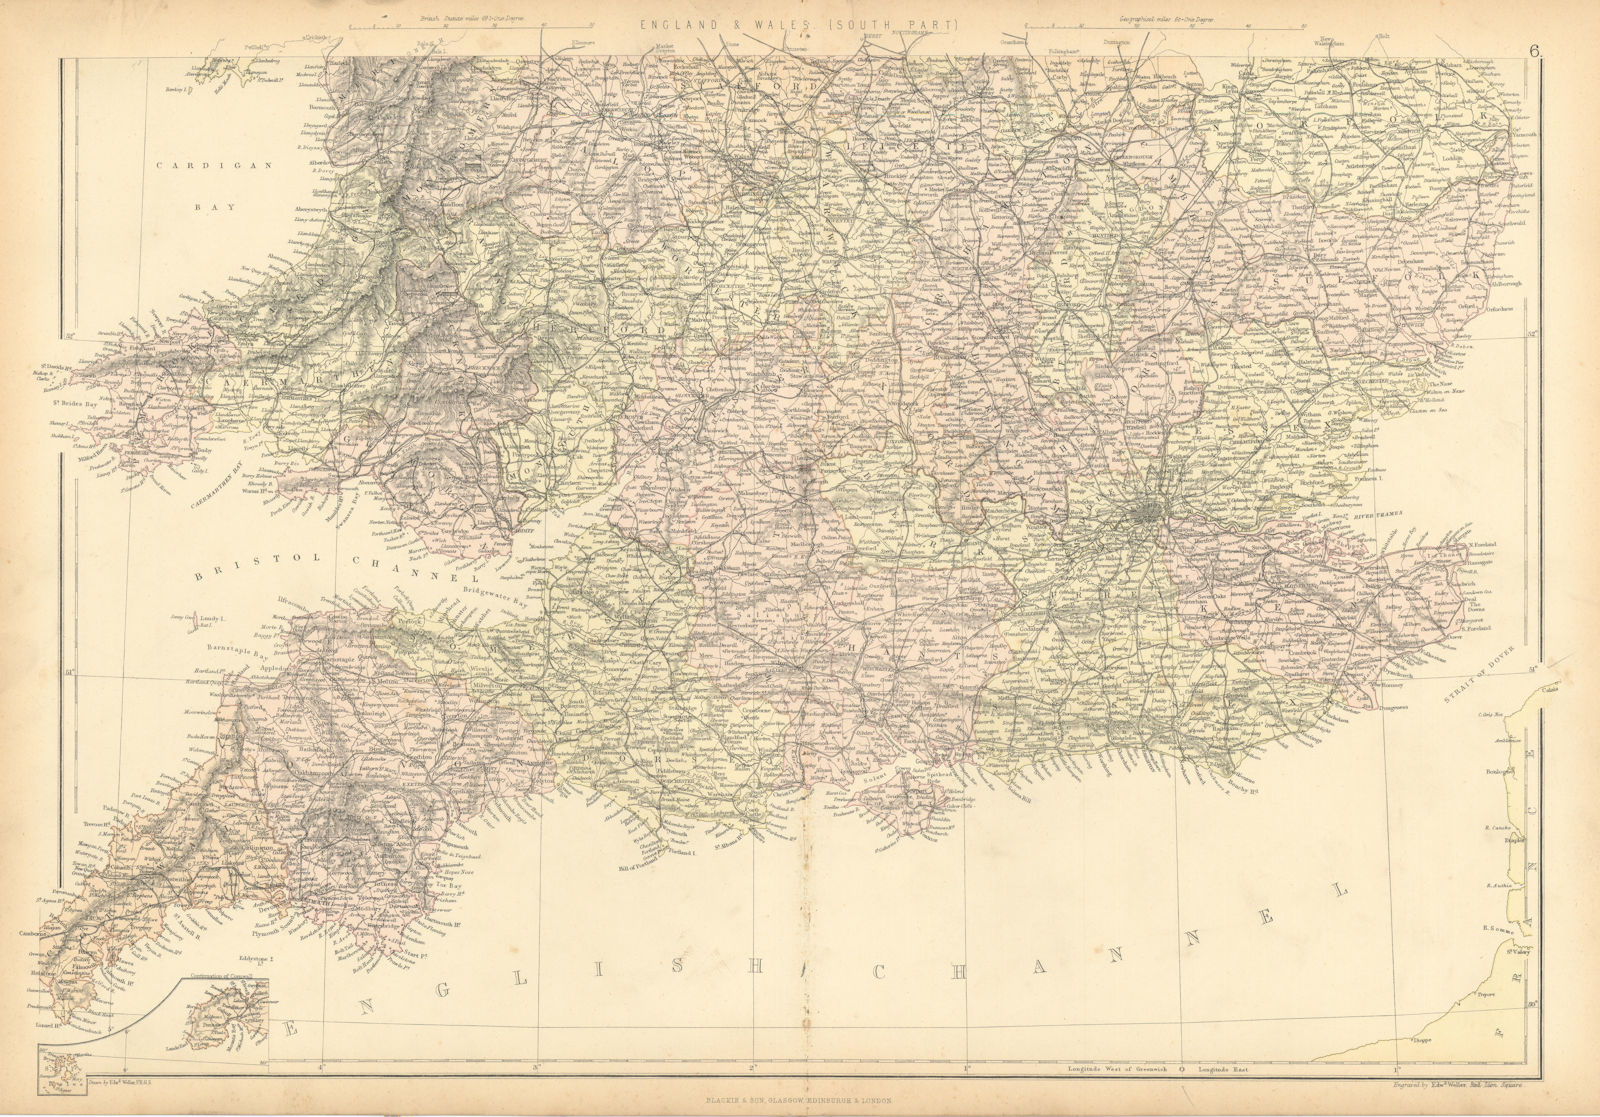 ENGLAND AND WALES SOUTH. Showing counties & railways. BLACKIE 1886 old map